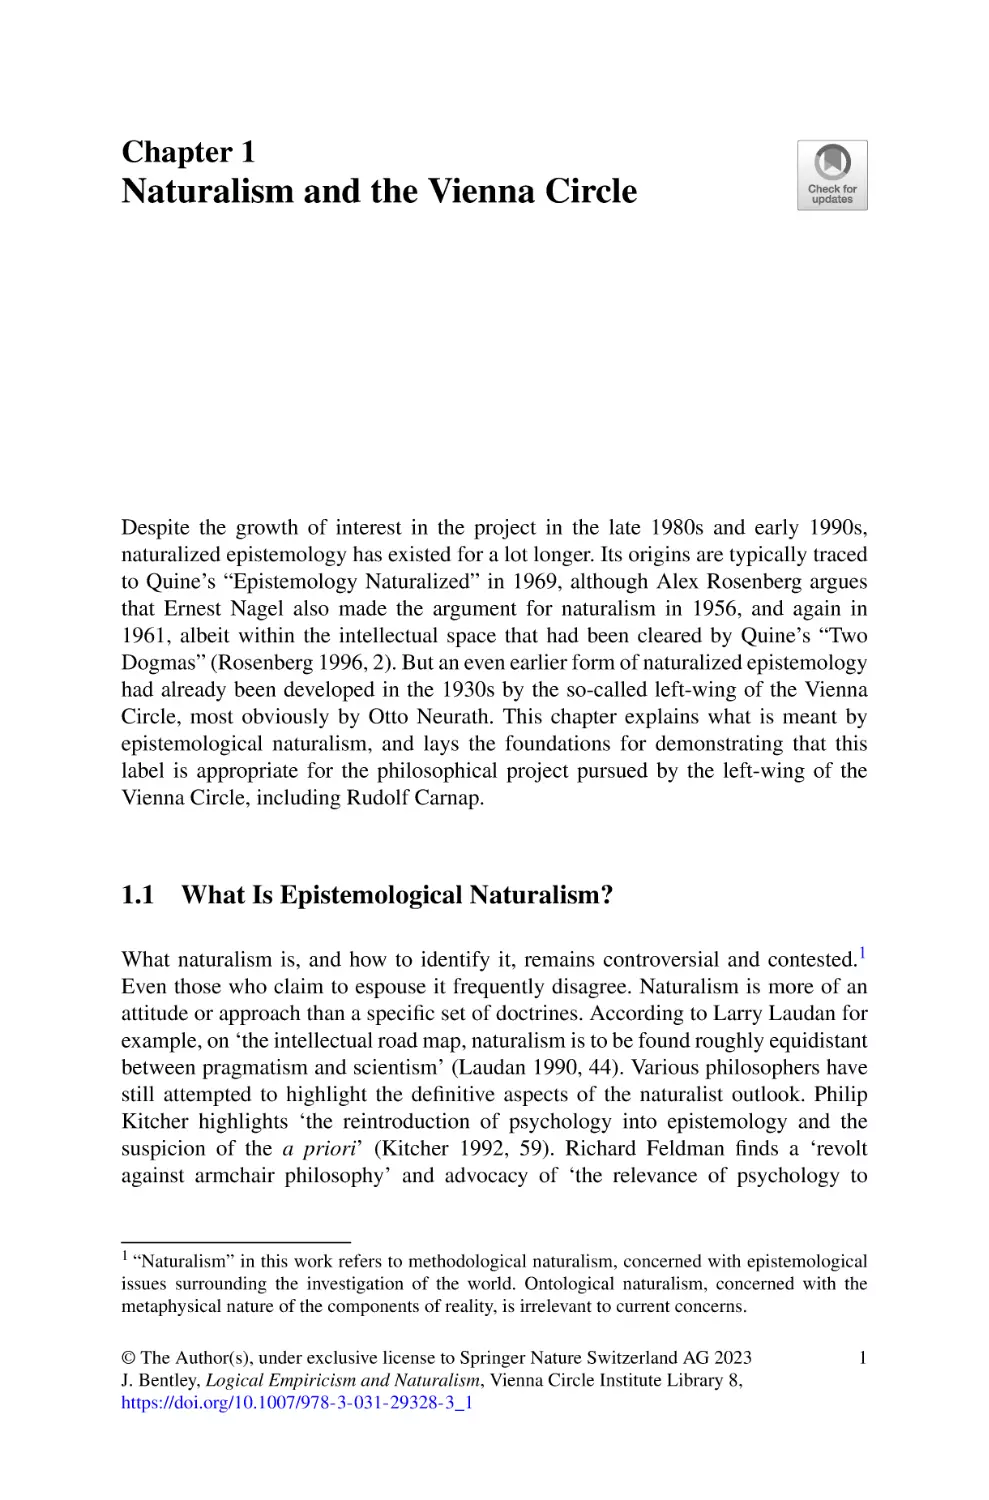 1 Naturalism and the Vienna Circle
1.1 What Is Epistemological Naturalism?